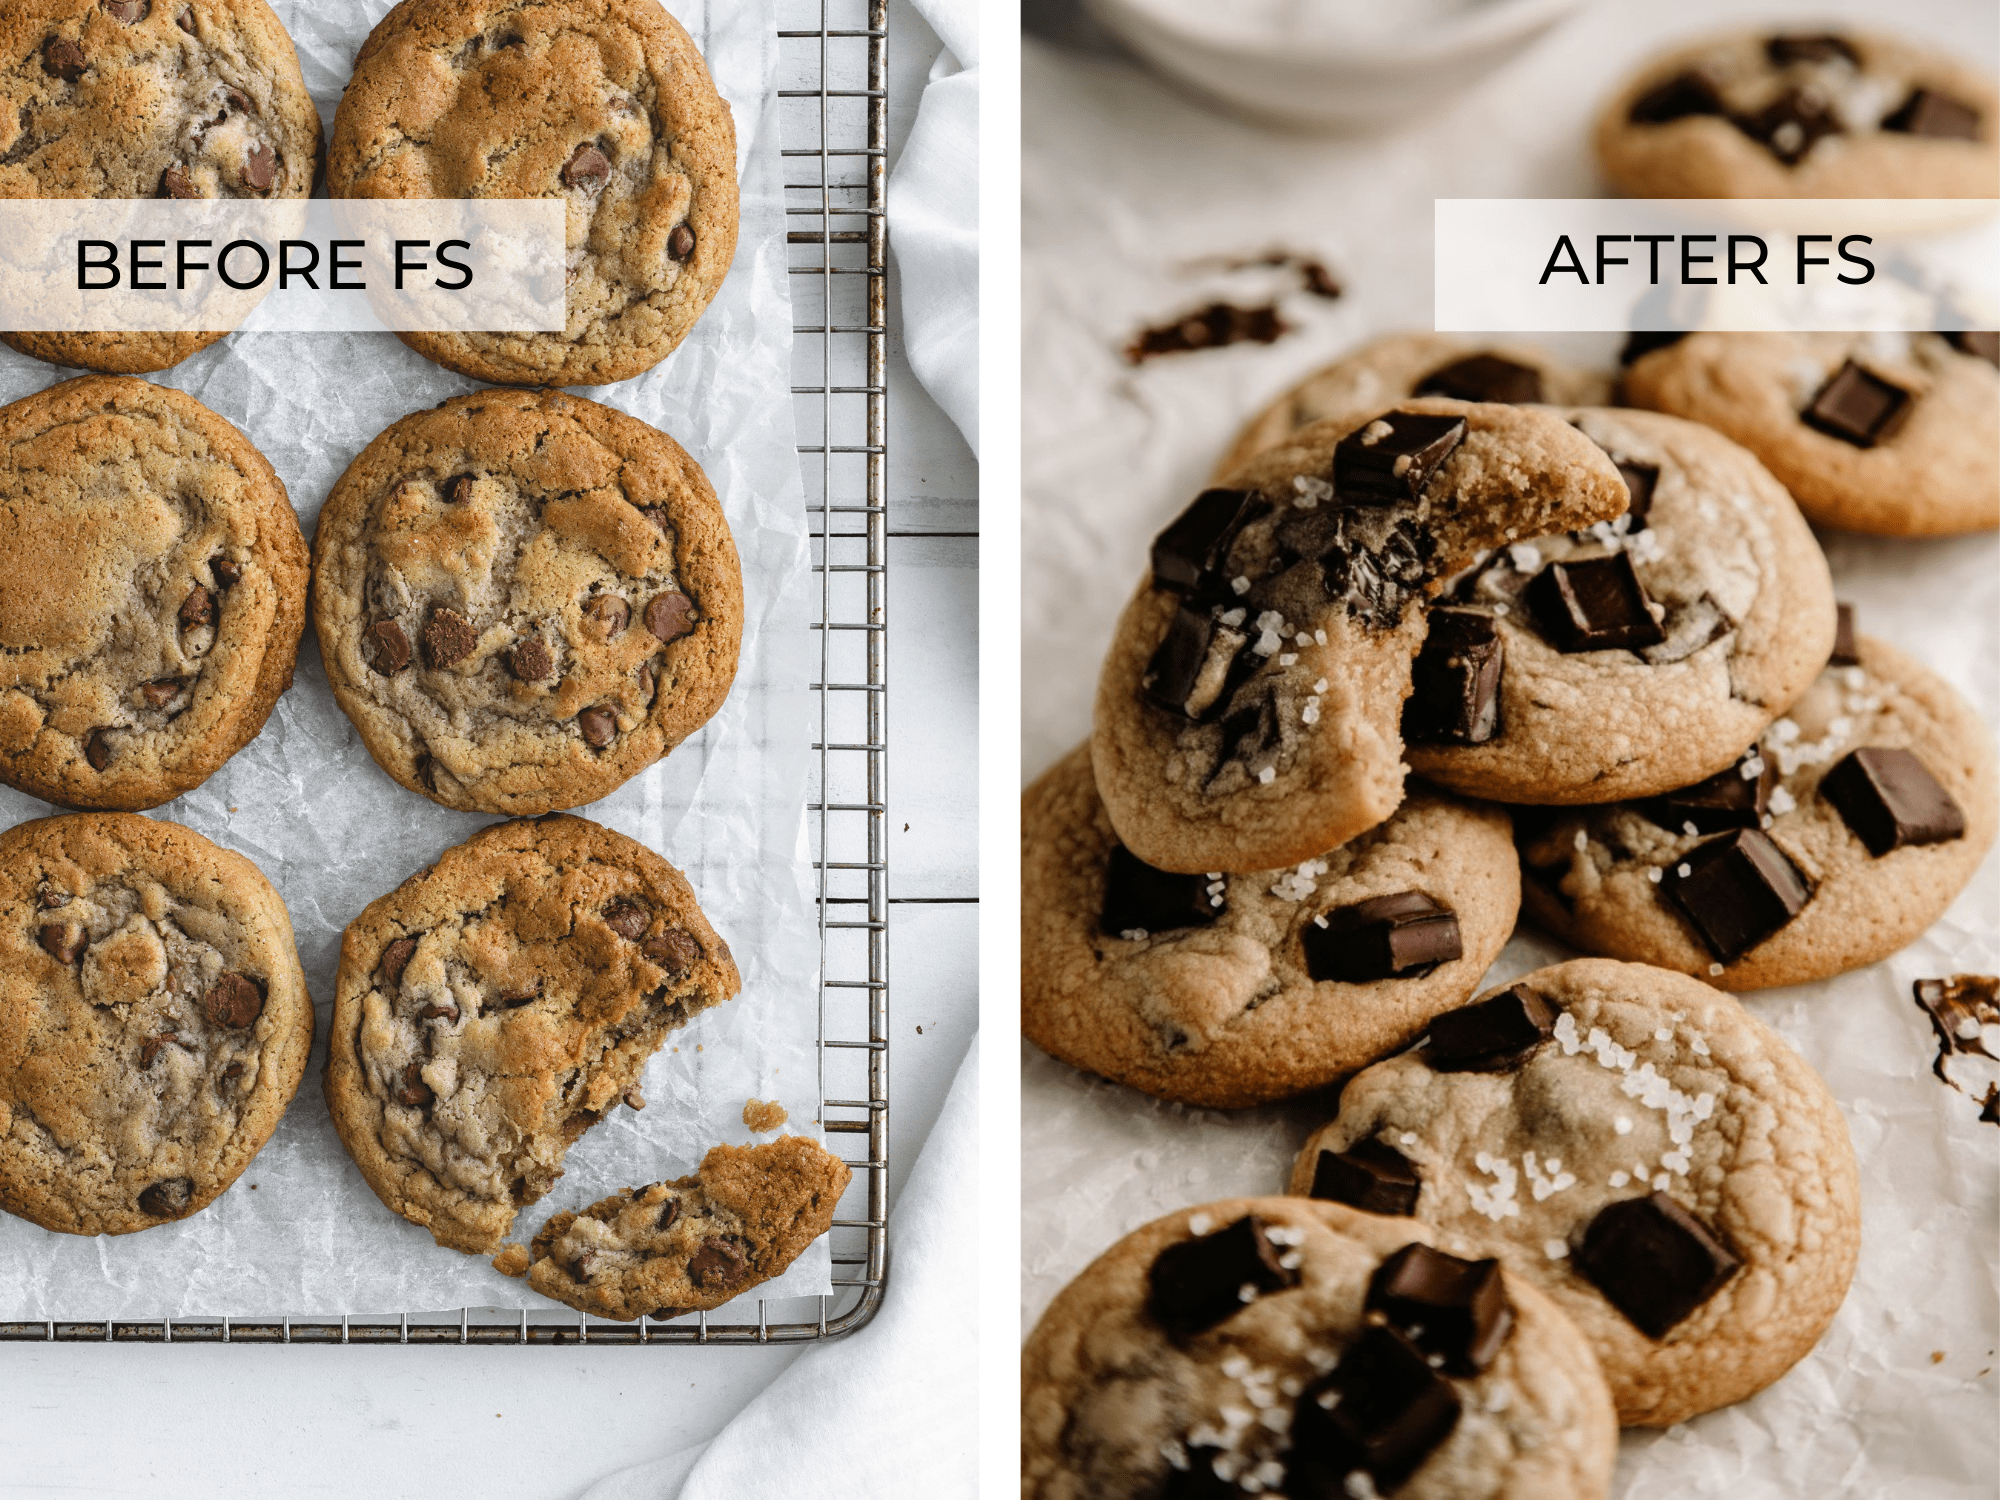 SIDE BY SIDE IMAGES OF CHOCOLATE CHIP COOKIES, BEFORE AND AFTER Foodtography School